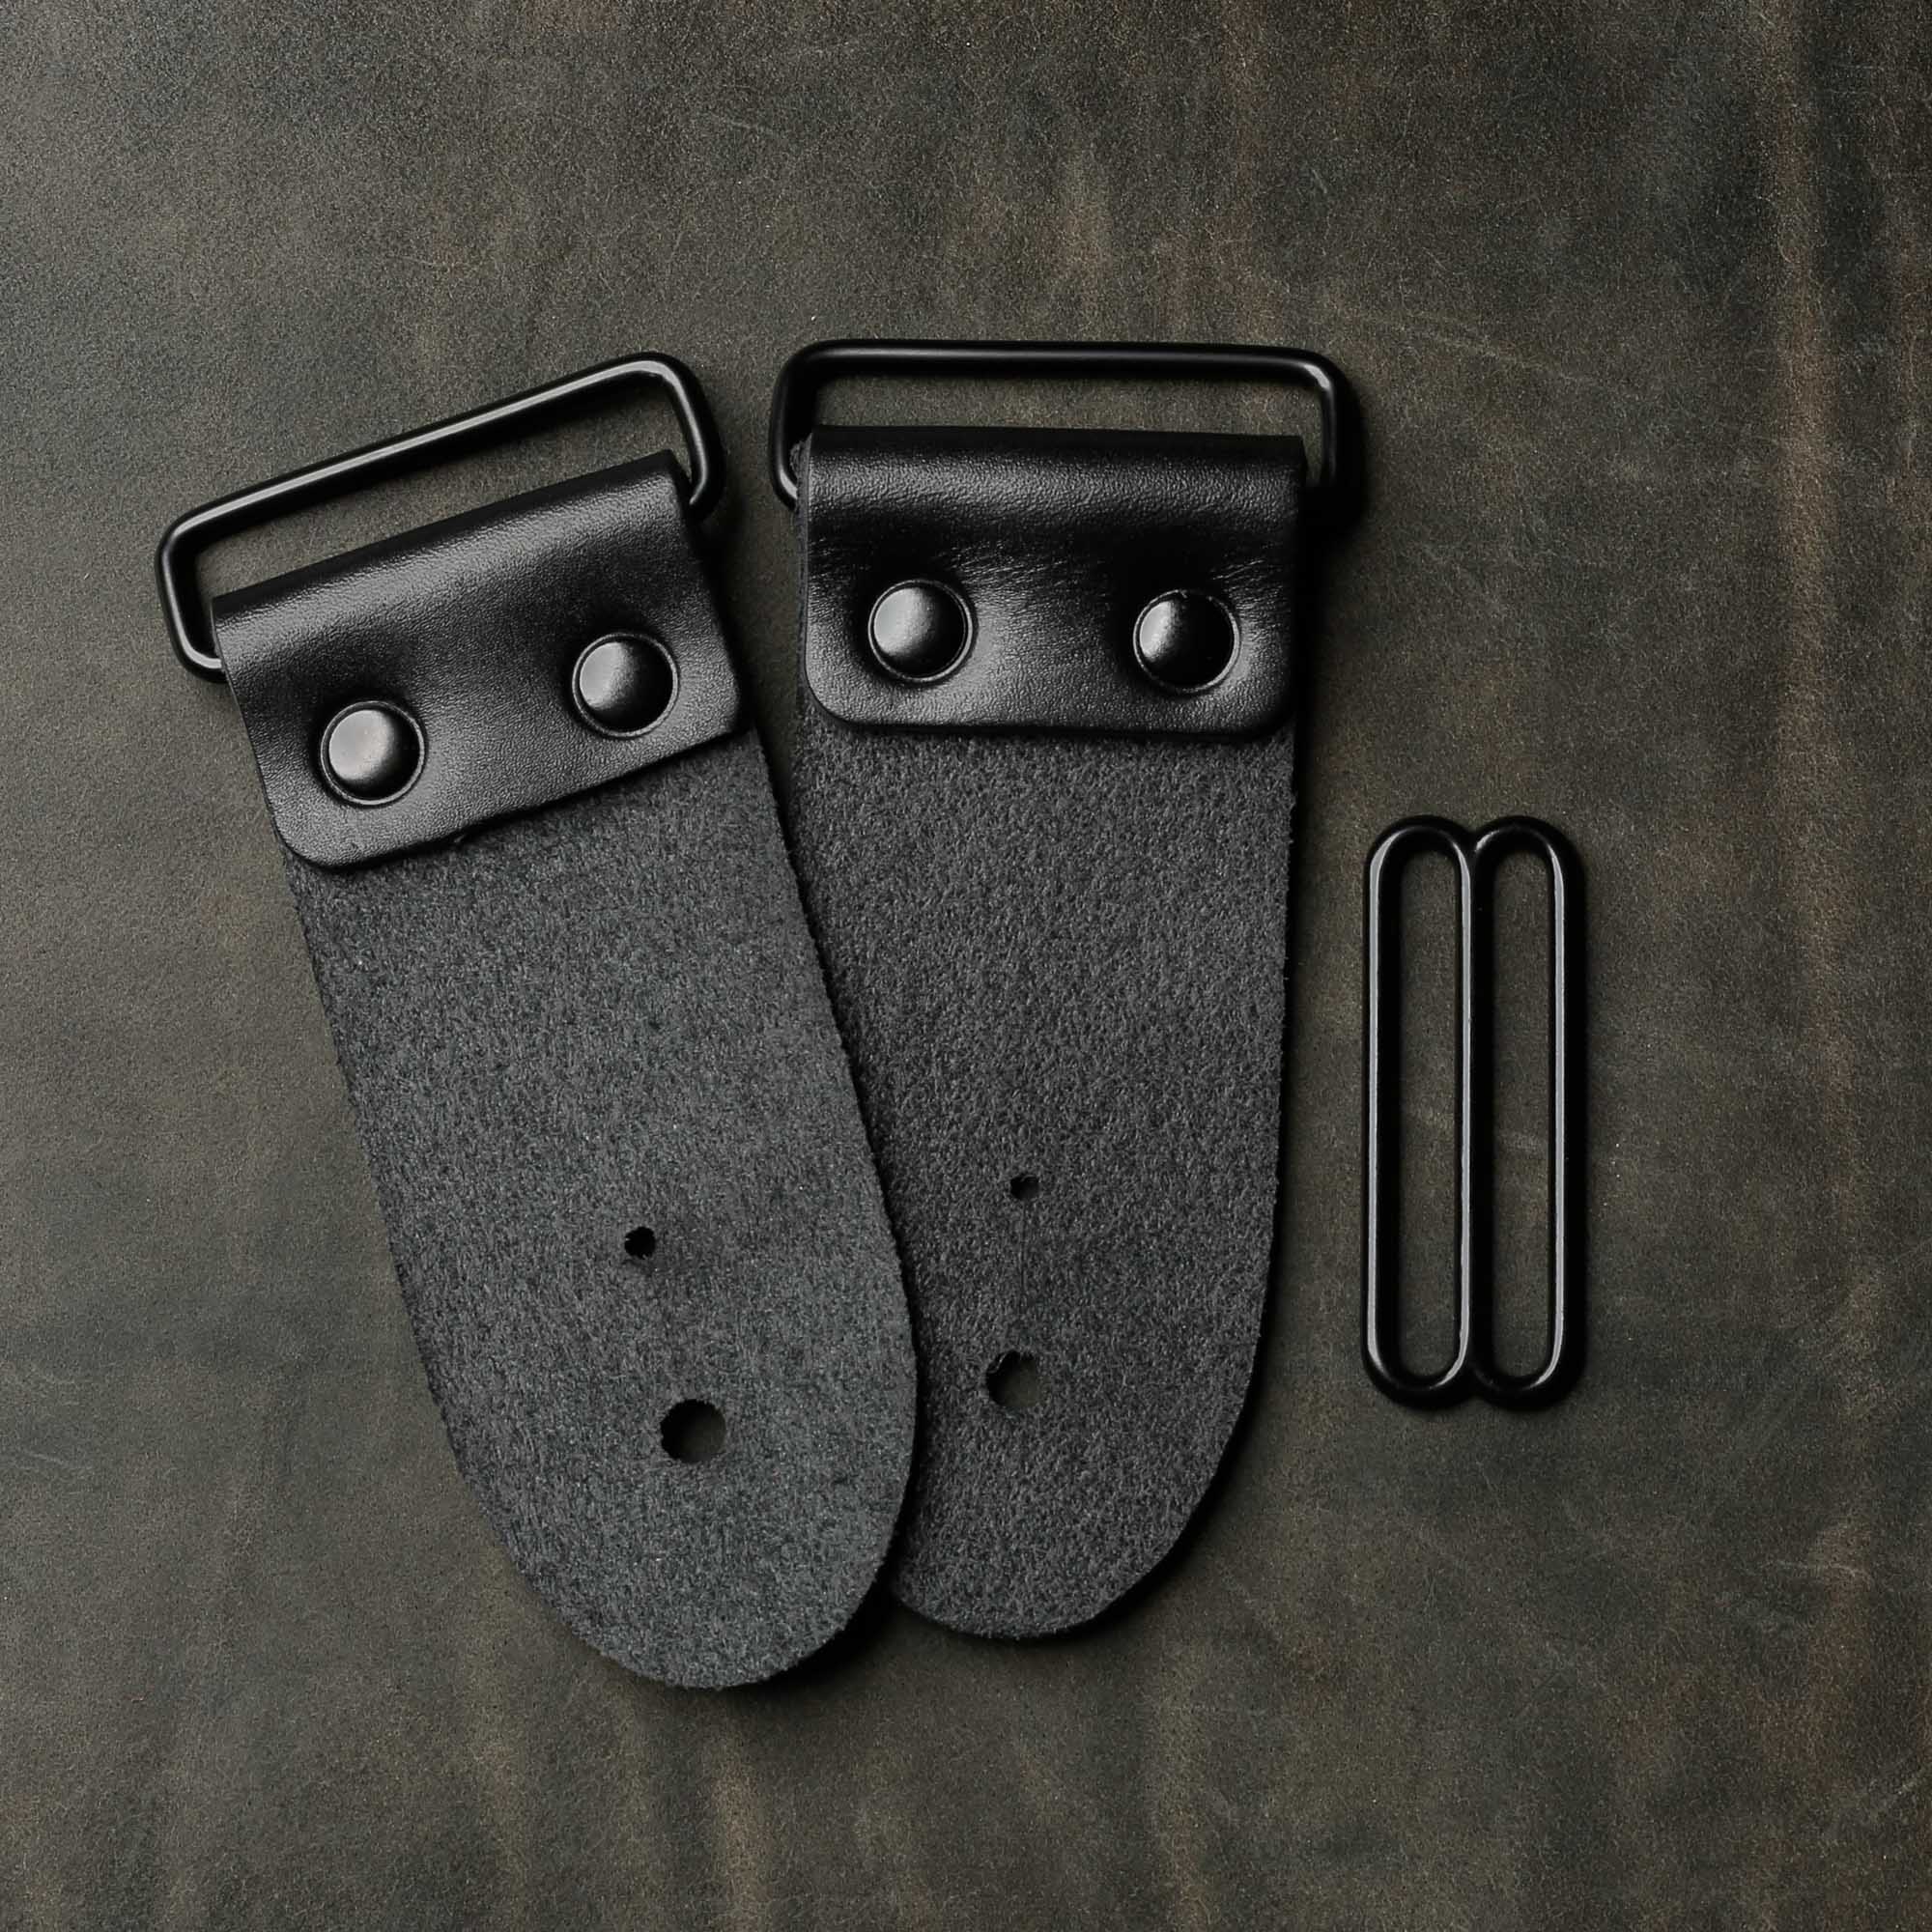 LEATHER STRAPS & HARDWARE One, Two or Three Leather Straps for